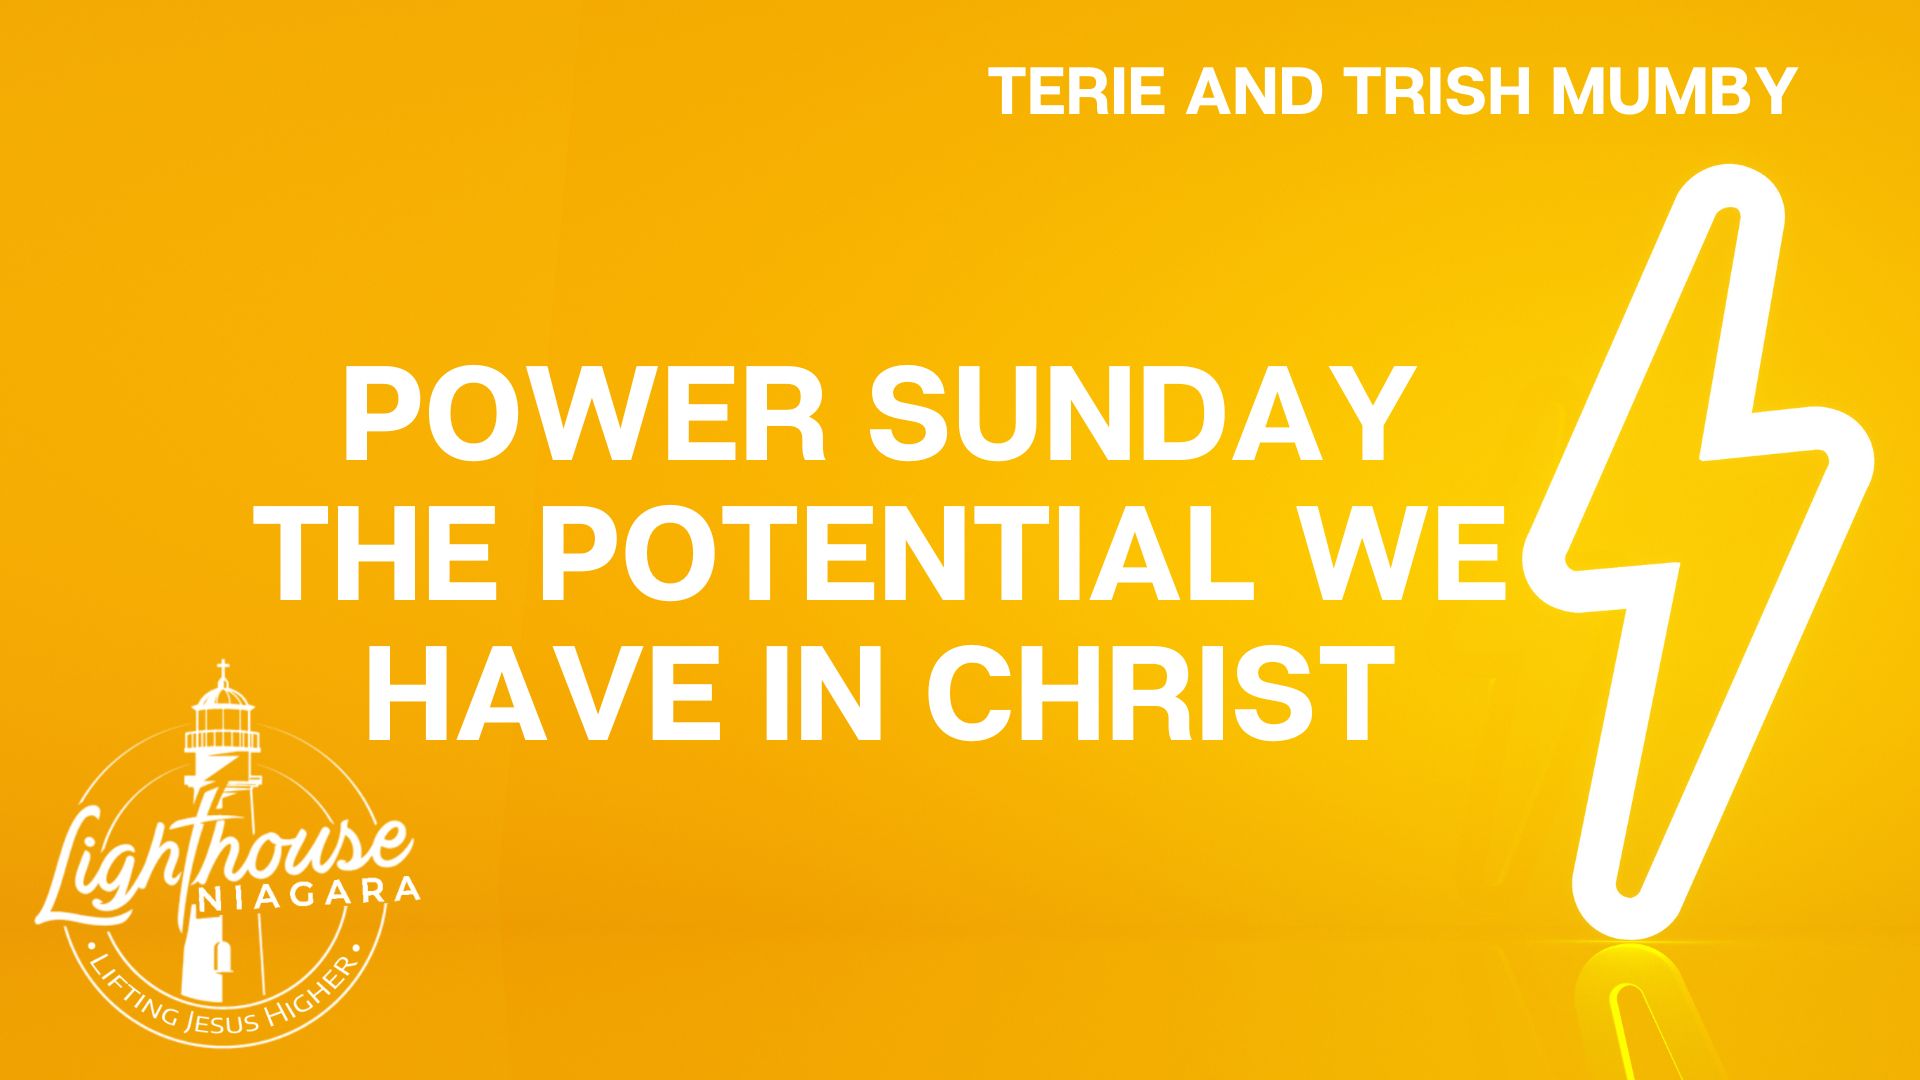 Power Sunday: The Potential We Have in Christ - Terie and Trish Mumby